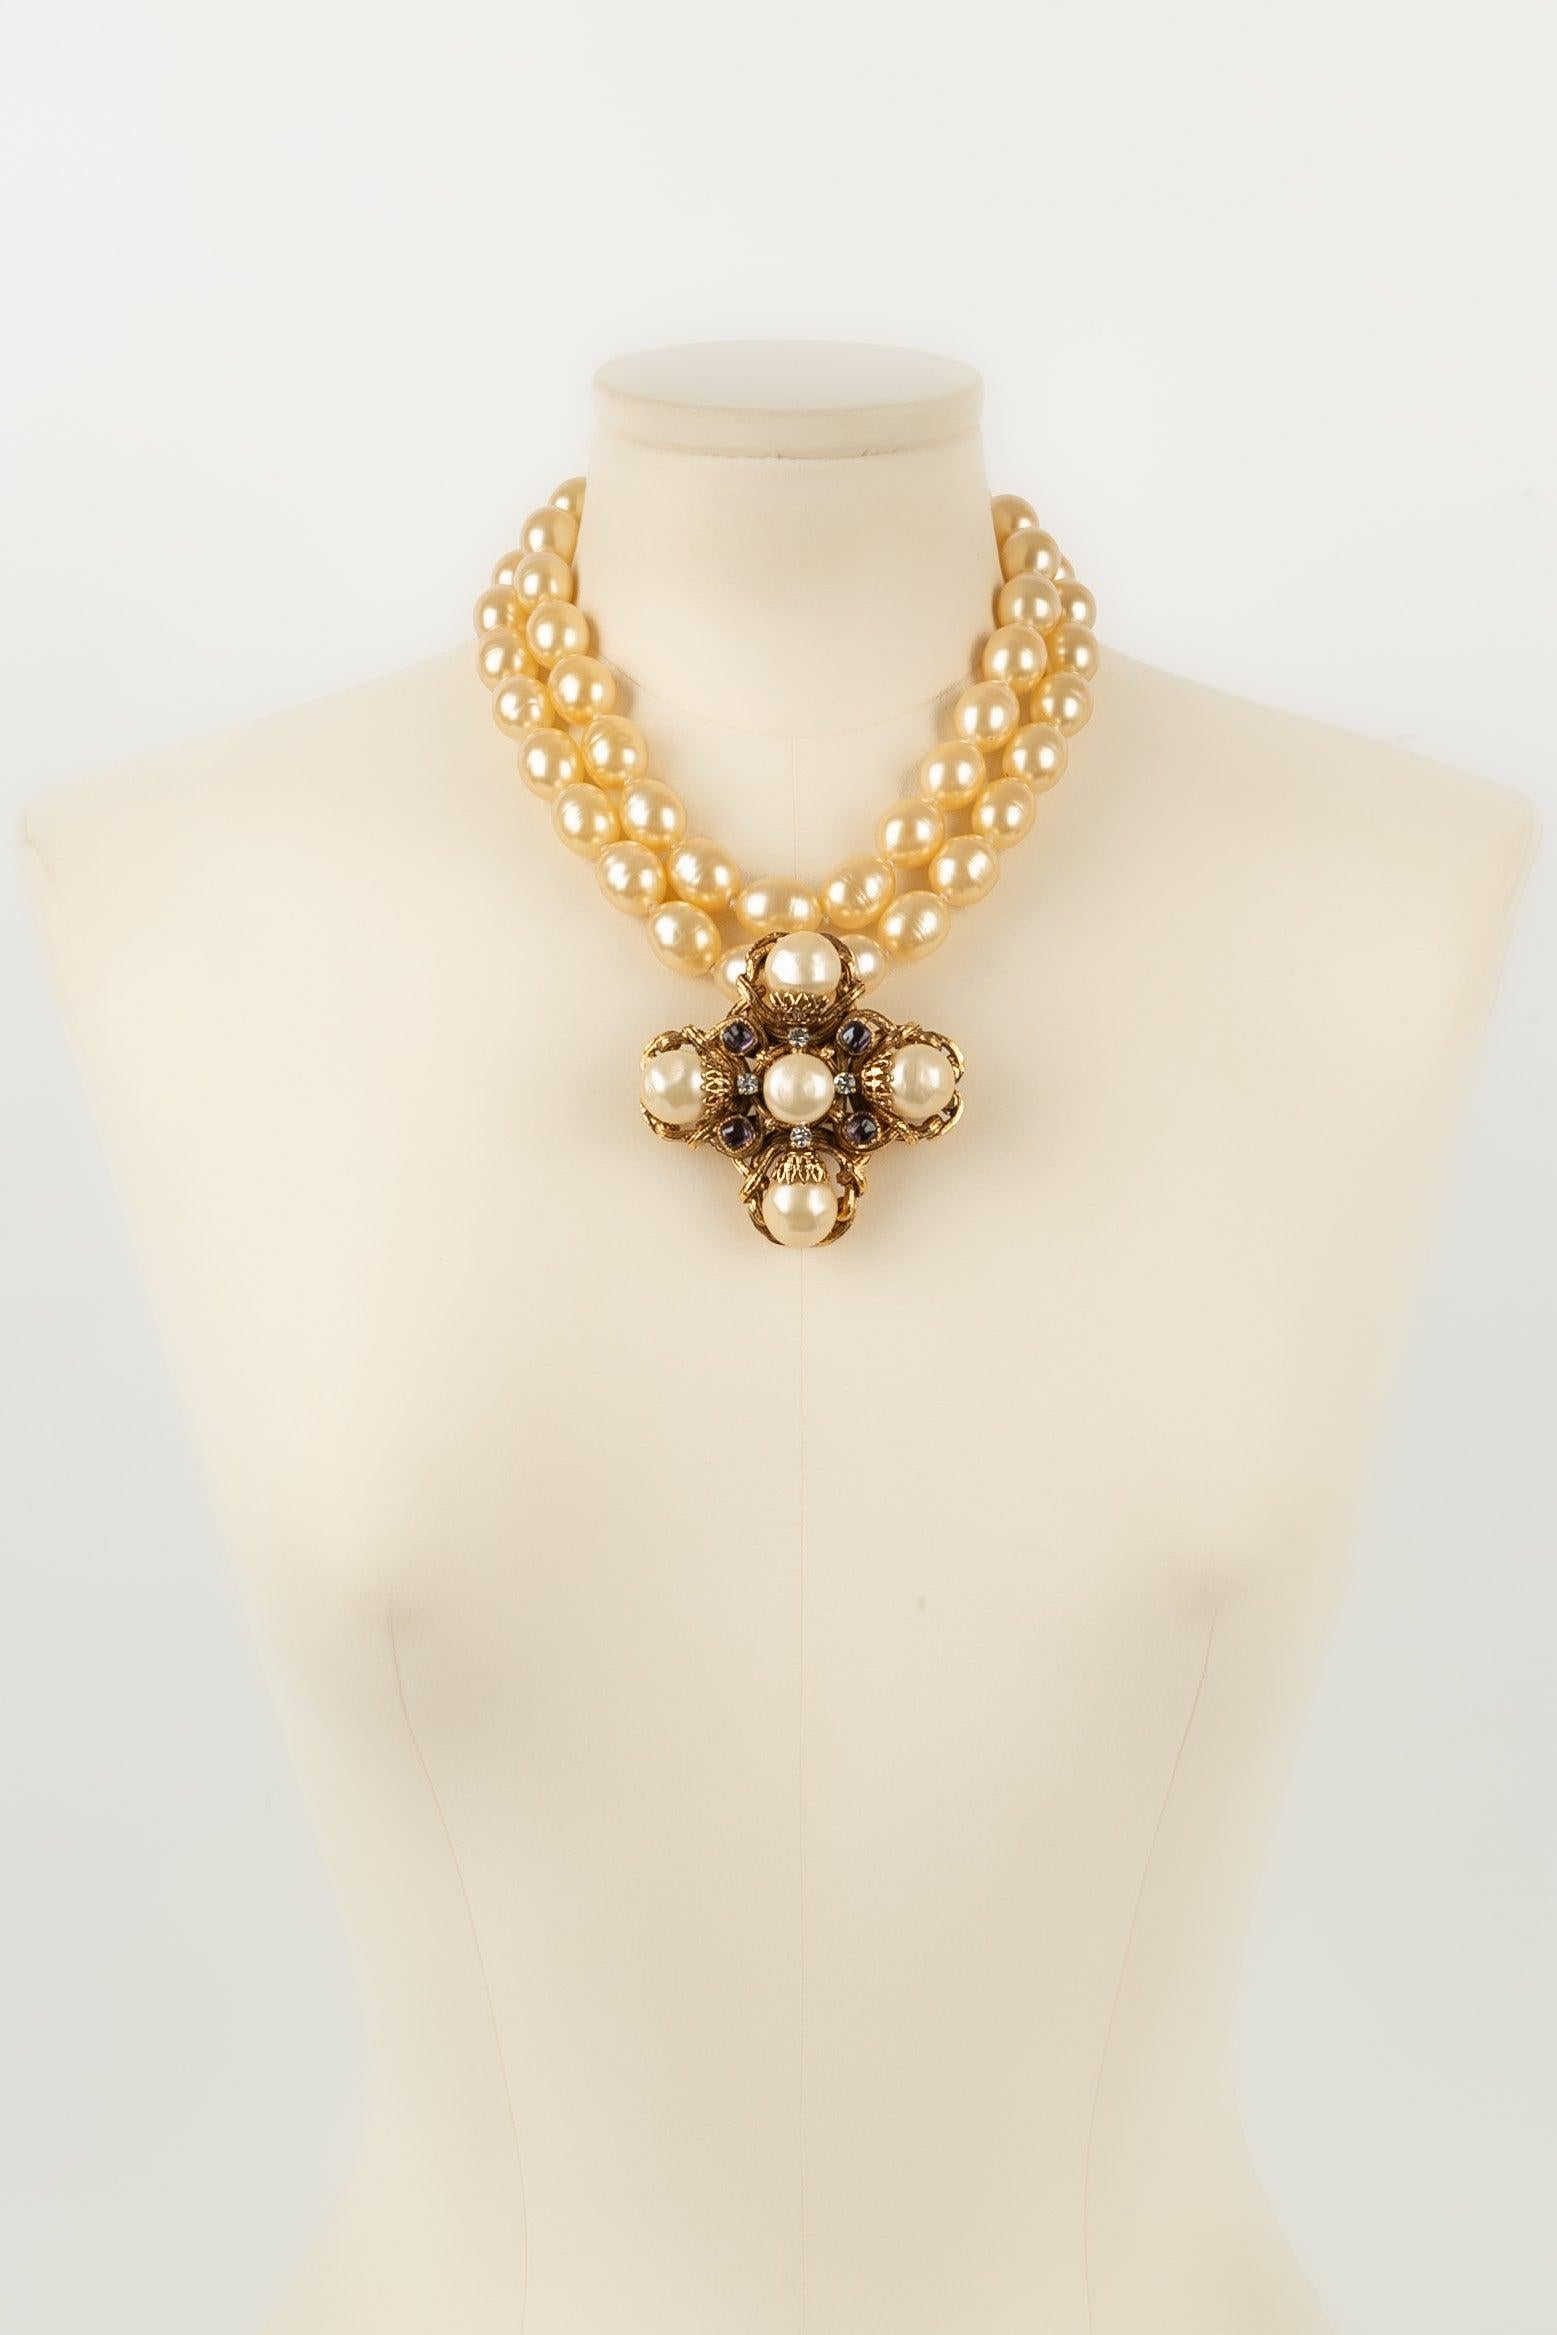 Chanel Short Two-Row Necklace with Pearly Beads In Excellent Condition For Sale In SAINT-OUEN-SUR-SEINE, FR